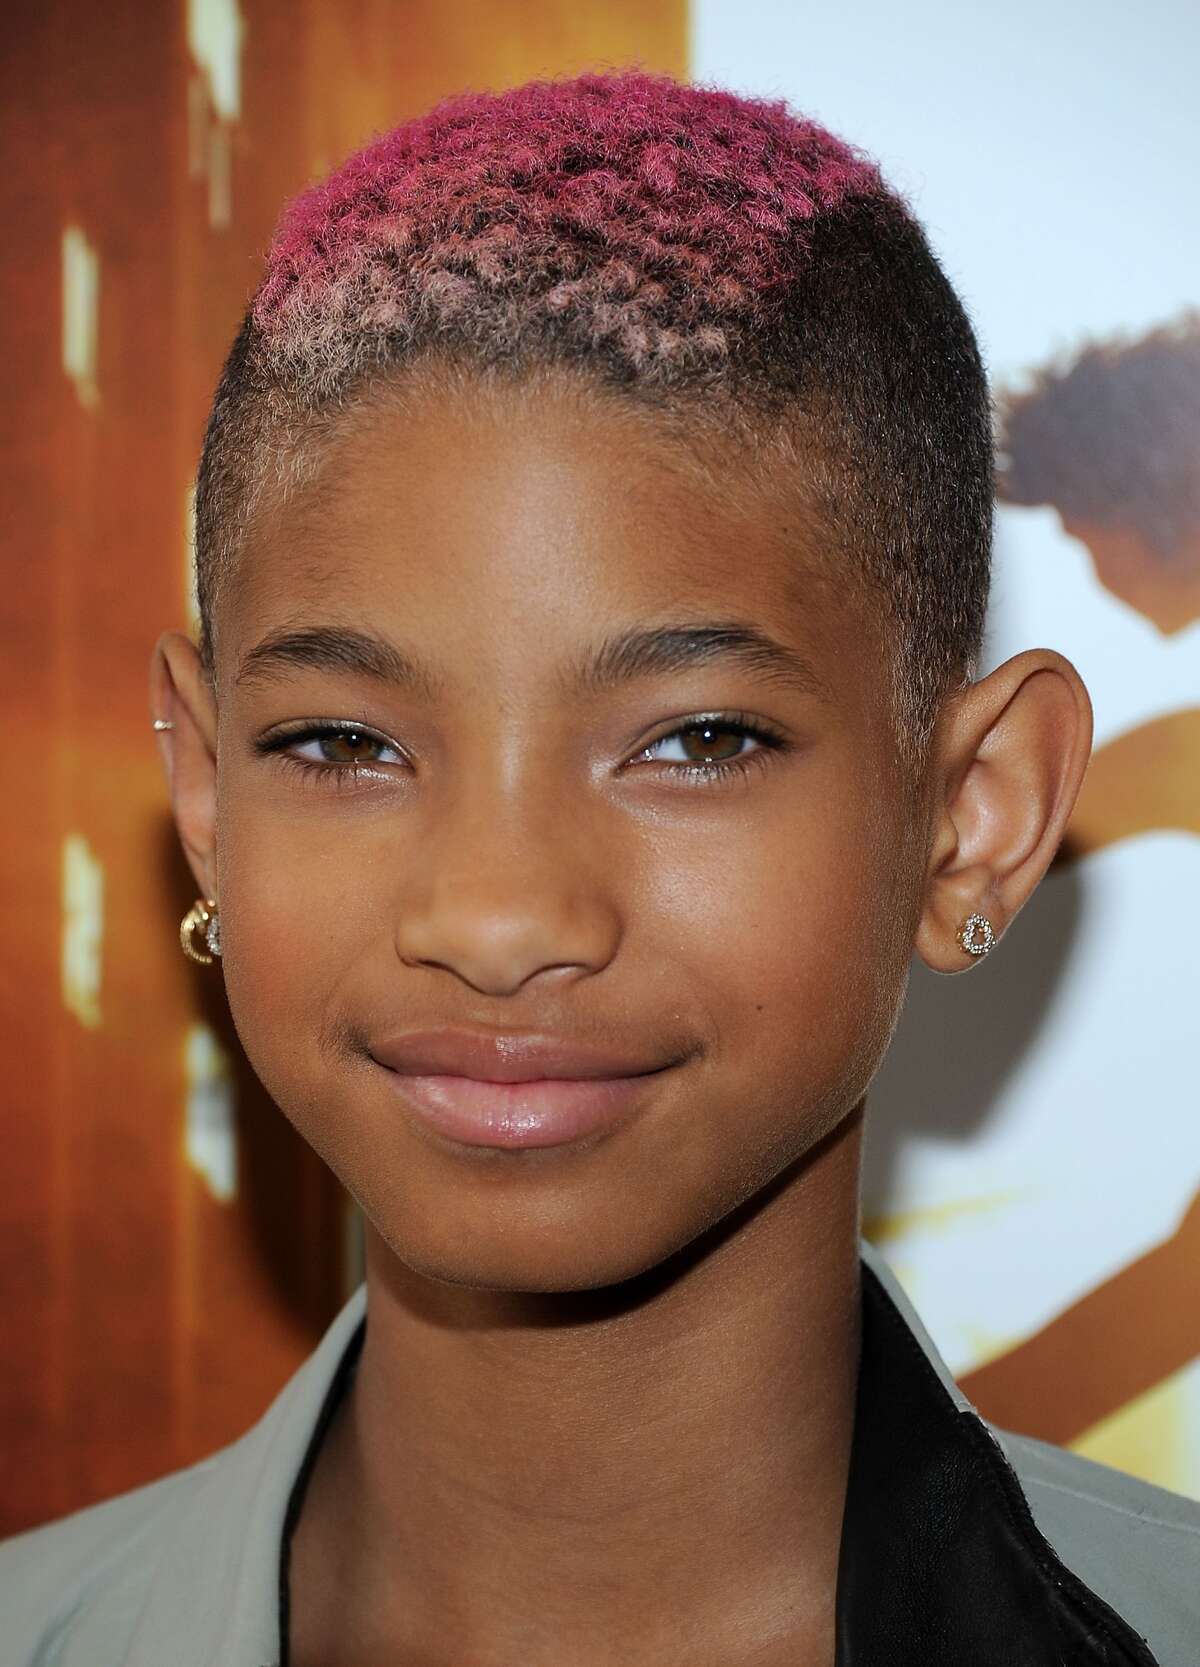 Will and Jada Pinkett Smith's daugher, Willow Smith, shaved her hair off in 2012.